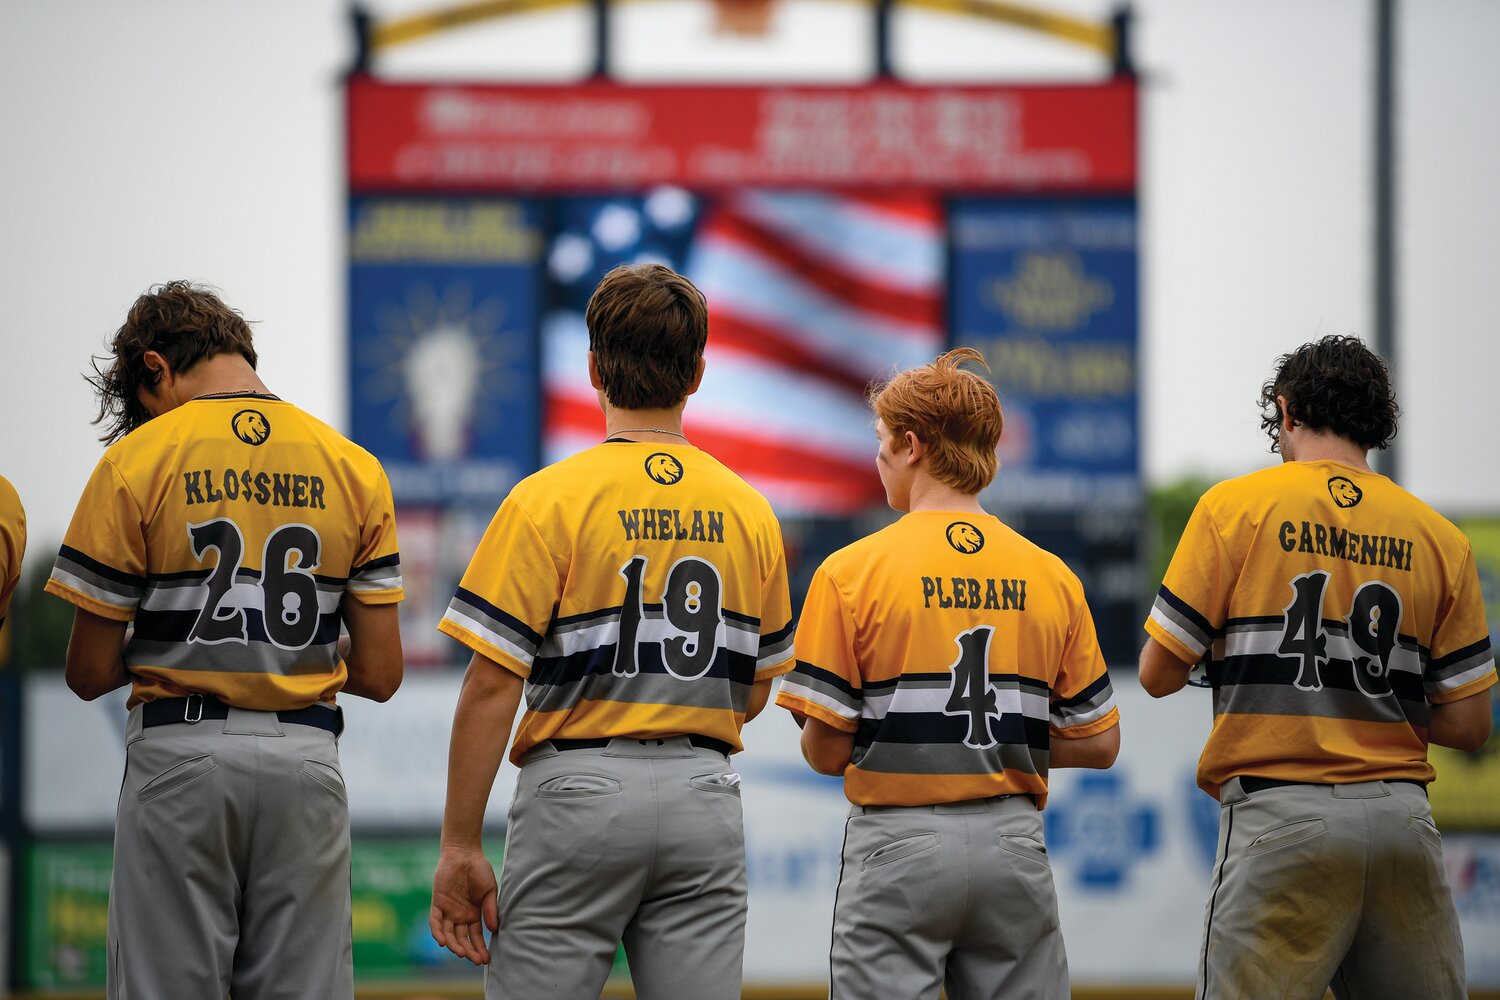 New Hope-Solebury players line up for the national anthem before the game.